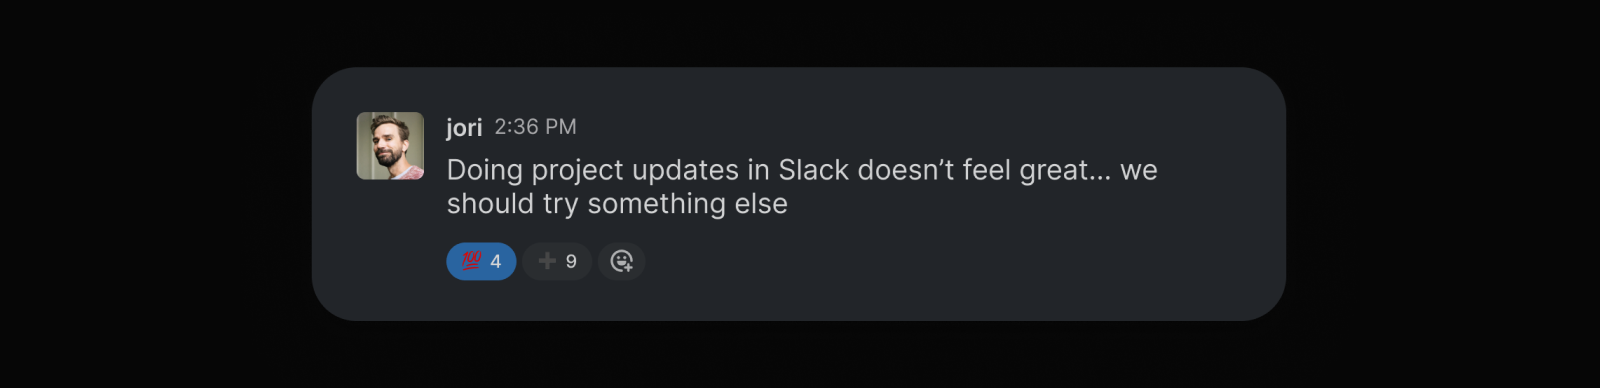 Screenshot of a Slack message from Jori that says "Doing project updates in Slack doesn't feel great ... we should try something else"